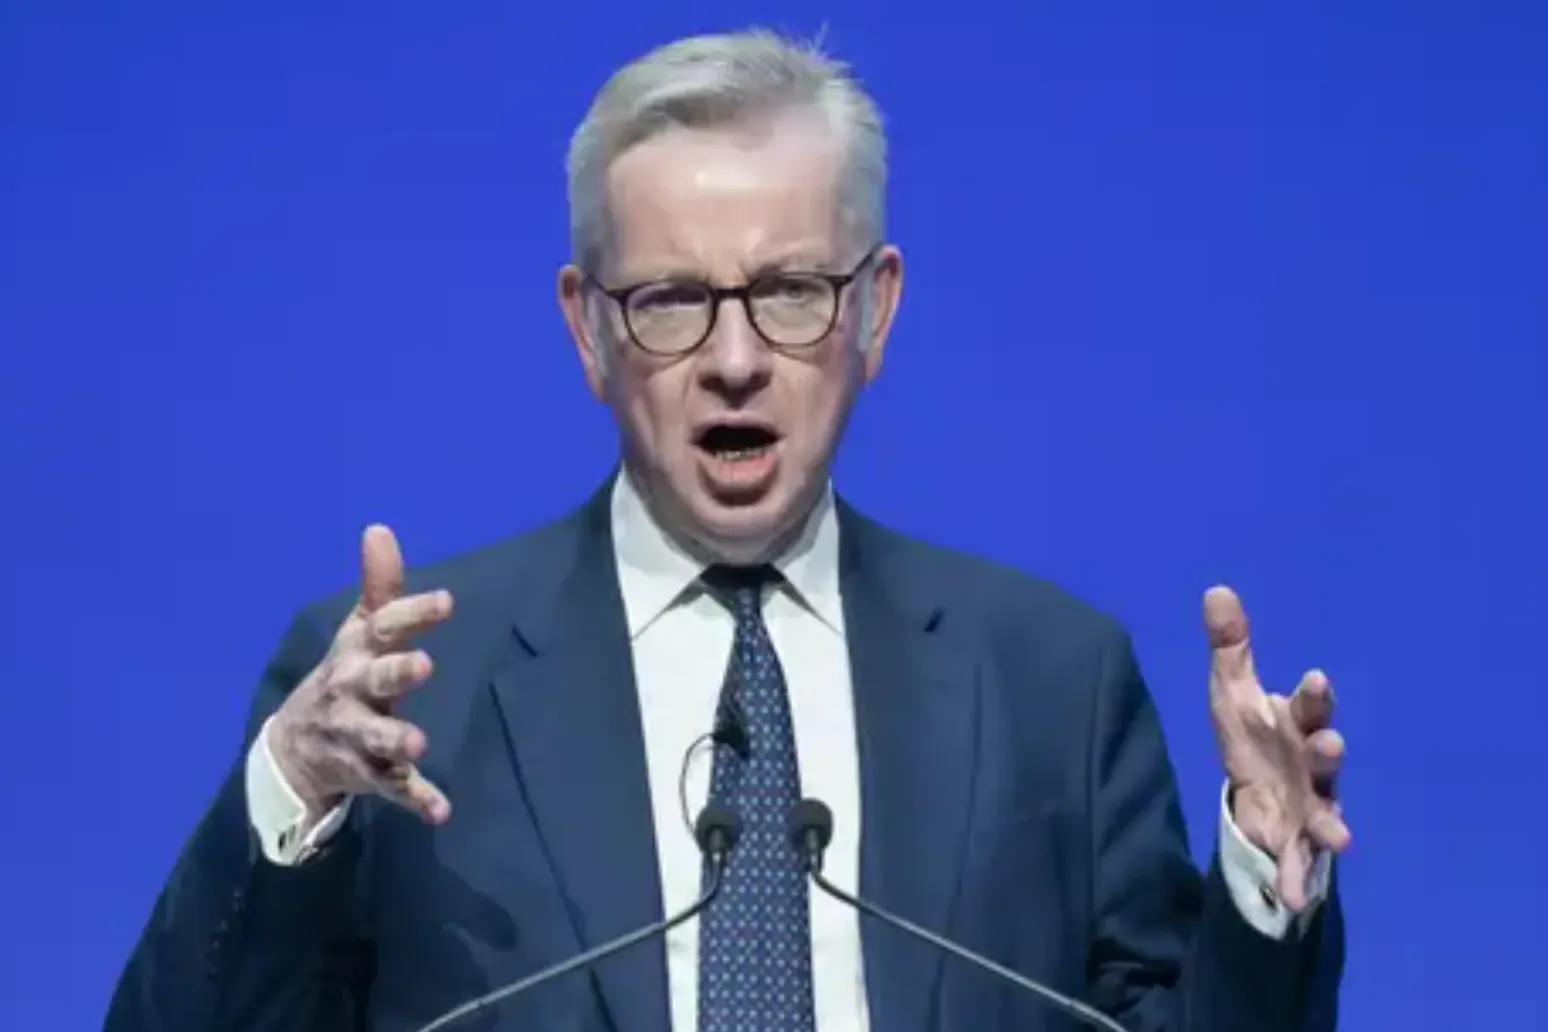 Michael Gove commits to staying on in Parliament amid resignation speculation. 